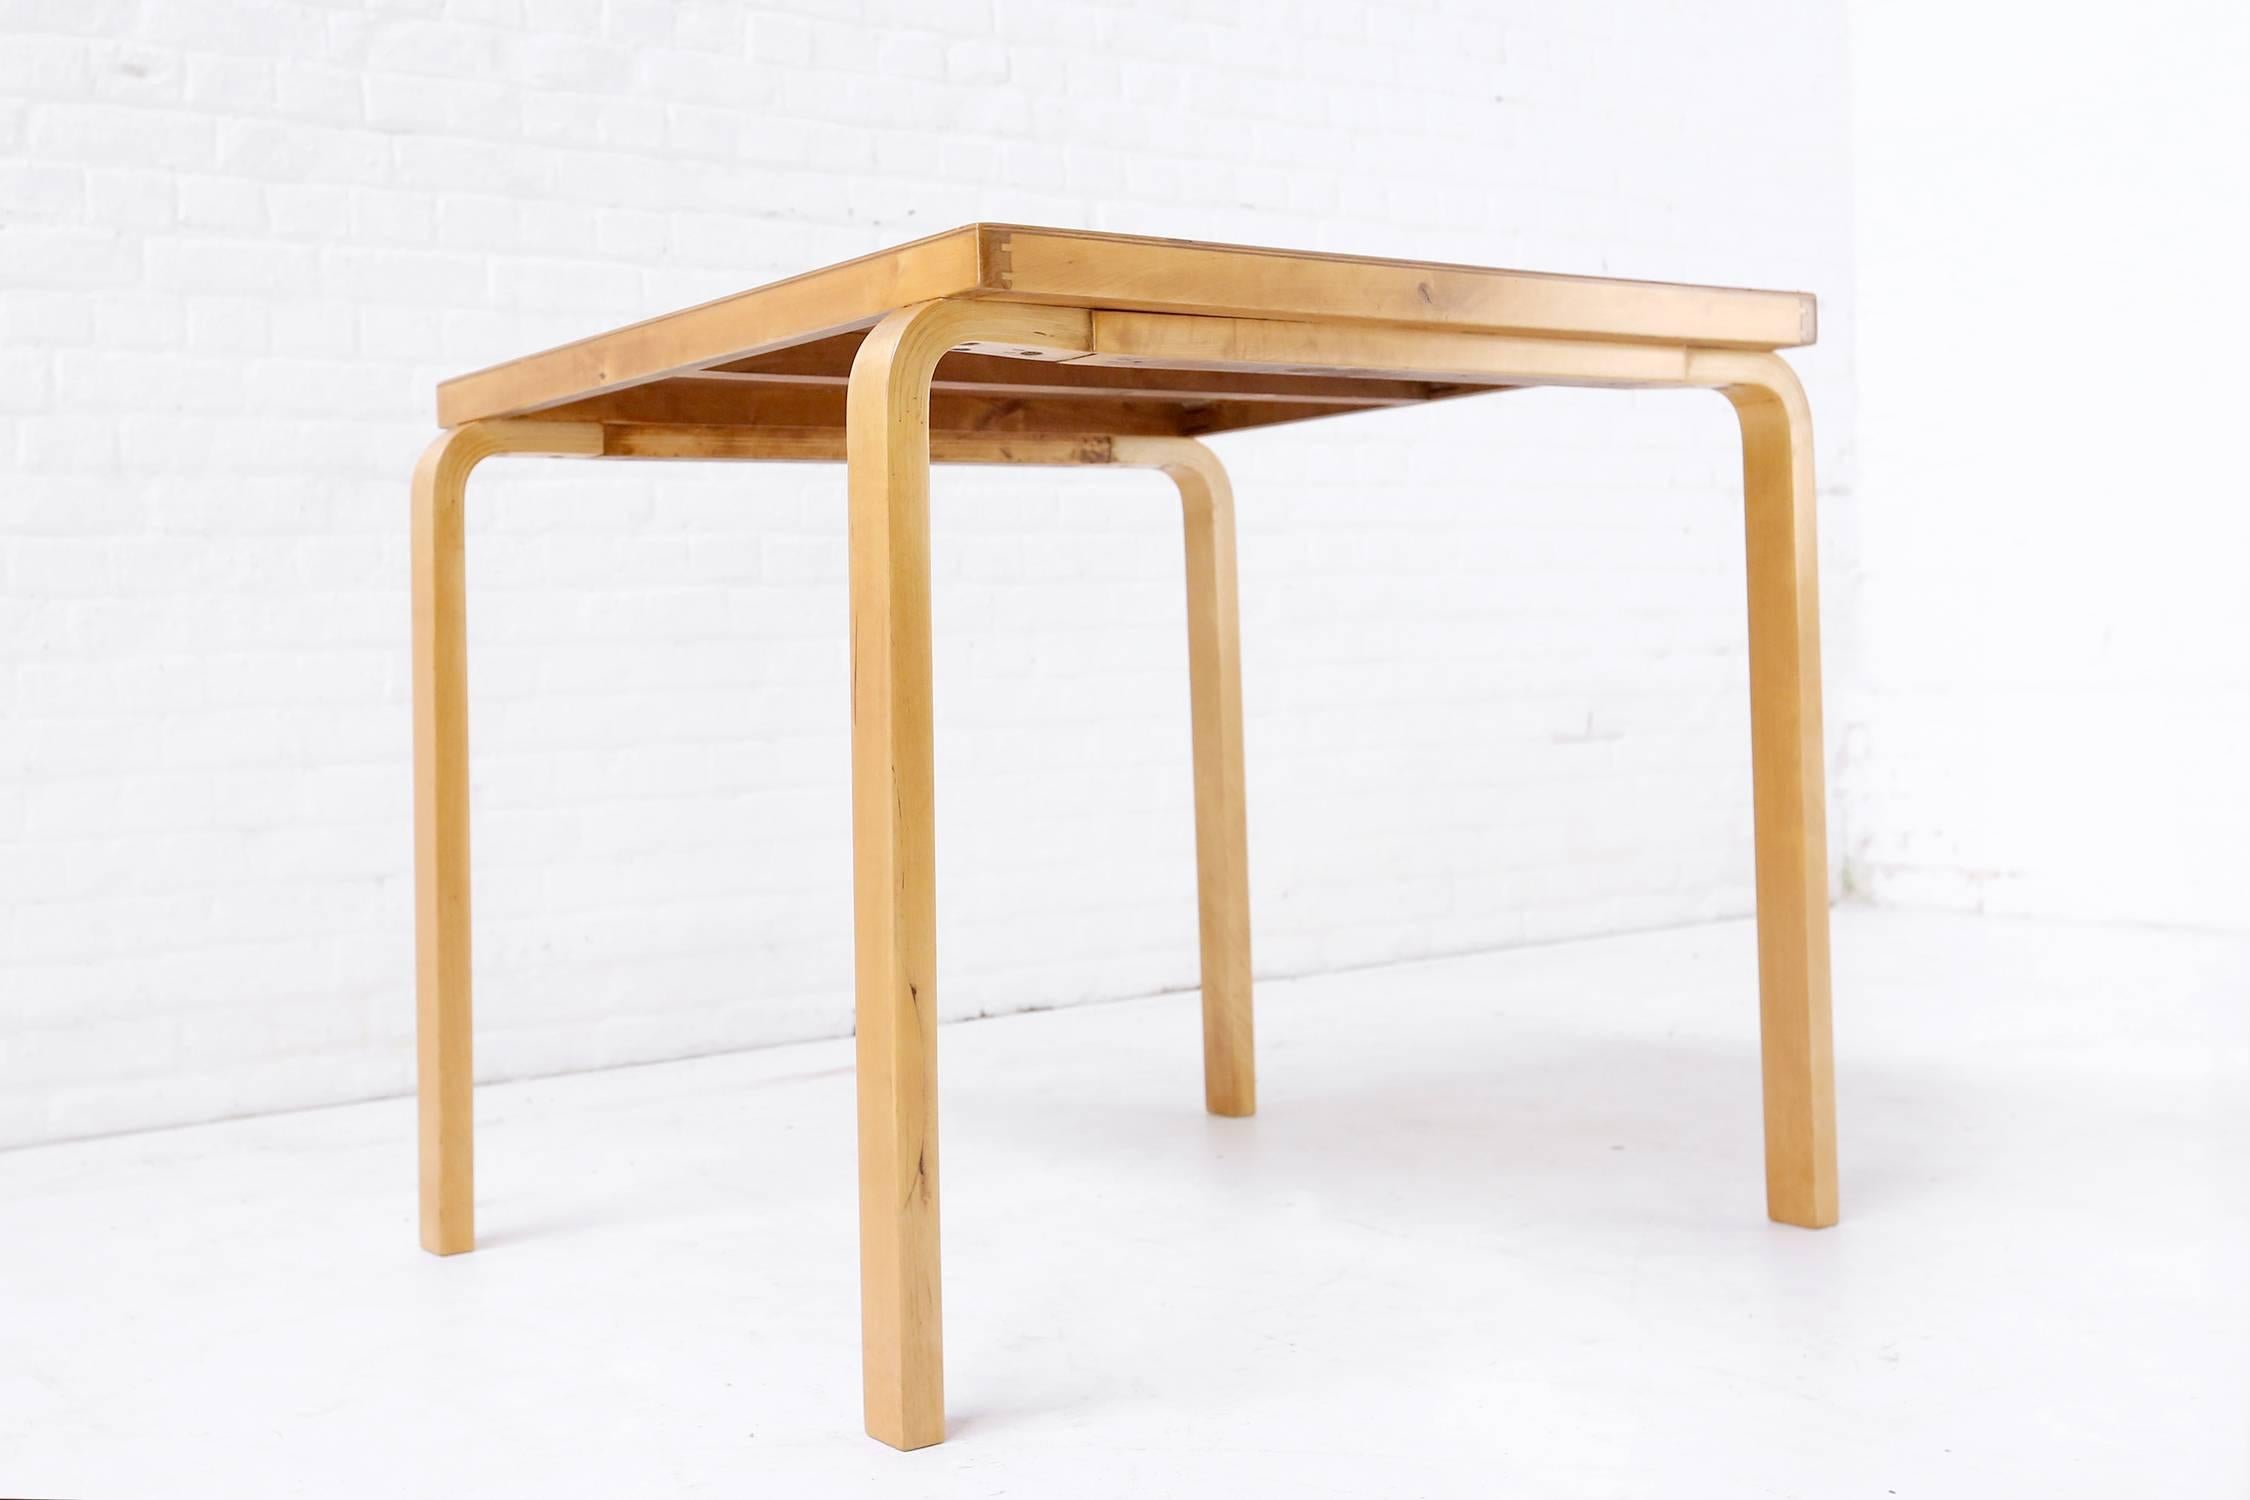 Small table or desk in birch plywood by Alvar Aalto, designed and made in the 1930s, metal Finmar label under the table.
This table has been professionally re-polished
It is a clear example of how Aalto obviated to the problem of connection